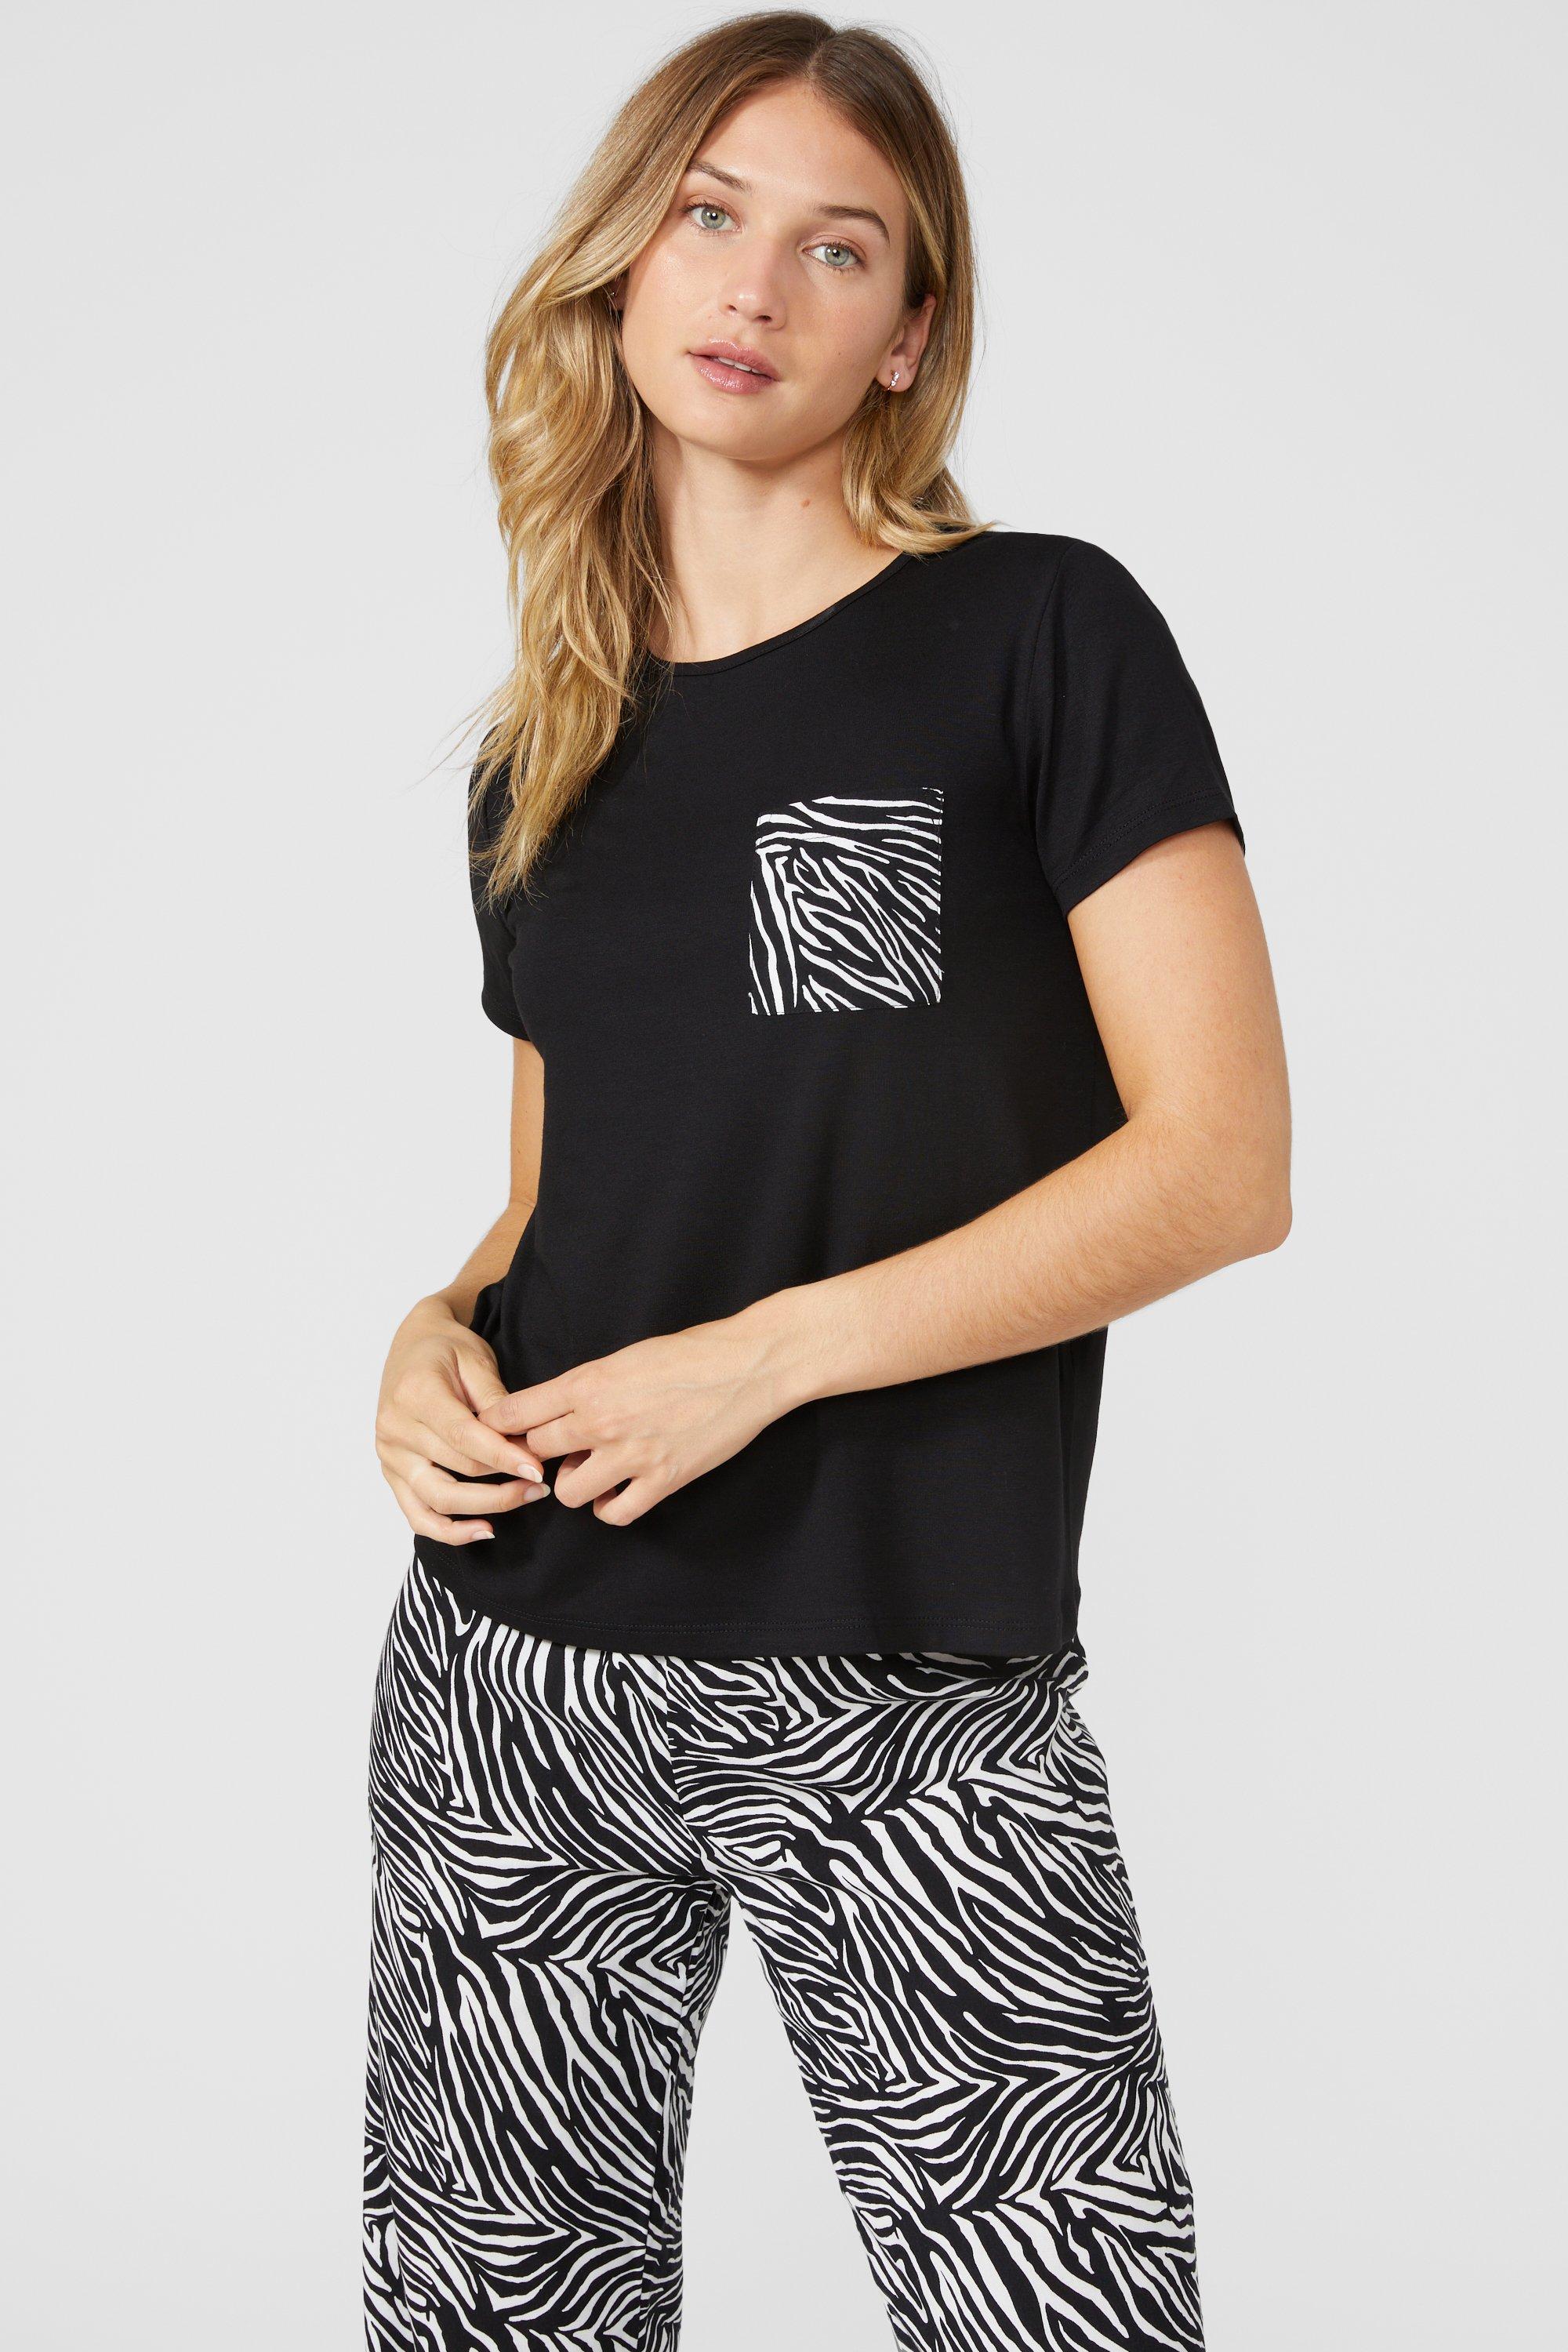 Zebra Short Sleeve Jersey Top With Printed Pocket